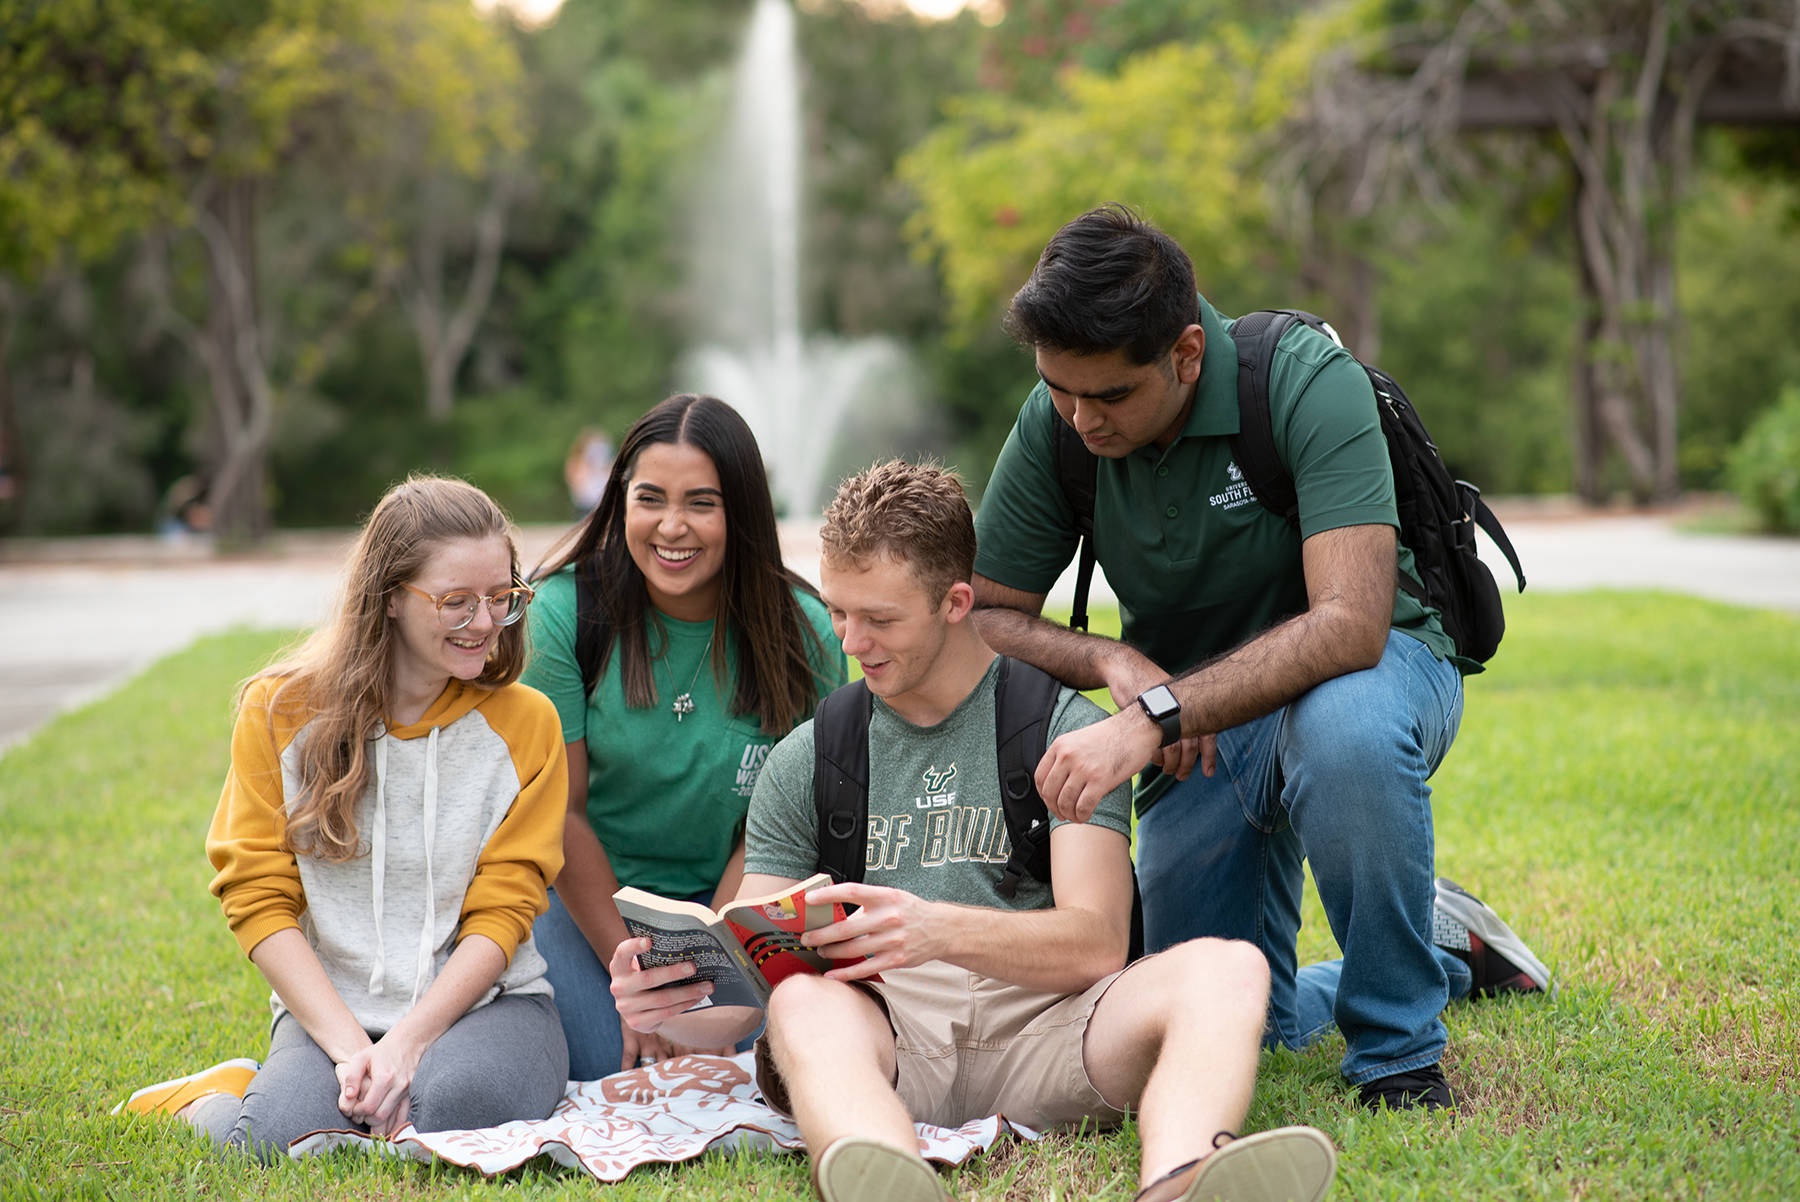 University Of South Florida Students On Field Wallpaper